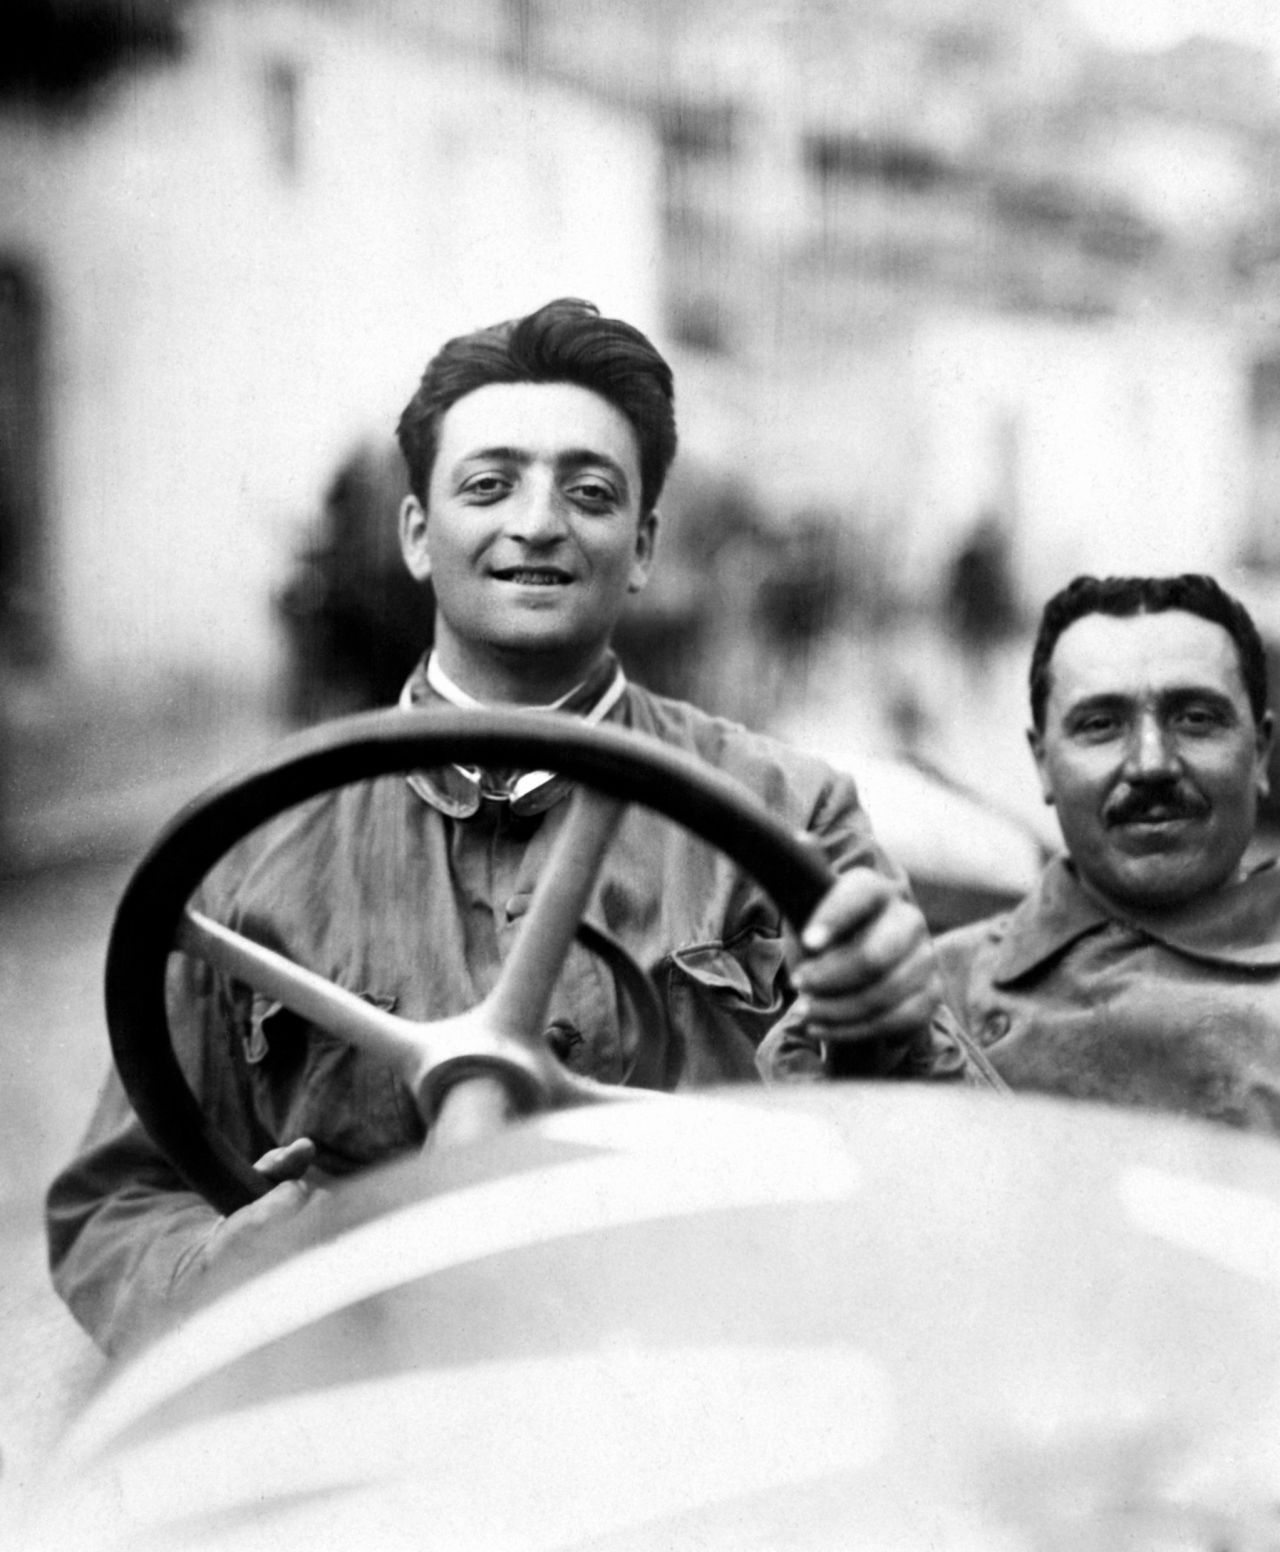 Born in 1898 on the outskirts of Modena -- known for "fast cars and slow food" -- the company's founder Enzo Ferrari devoted his entire life to the pursuit of speed. The Italian is pictured here as a young man sitting in an Alfa Romeo 40-60 HP Racing Type.